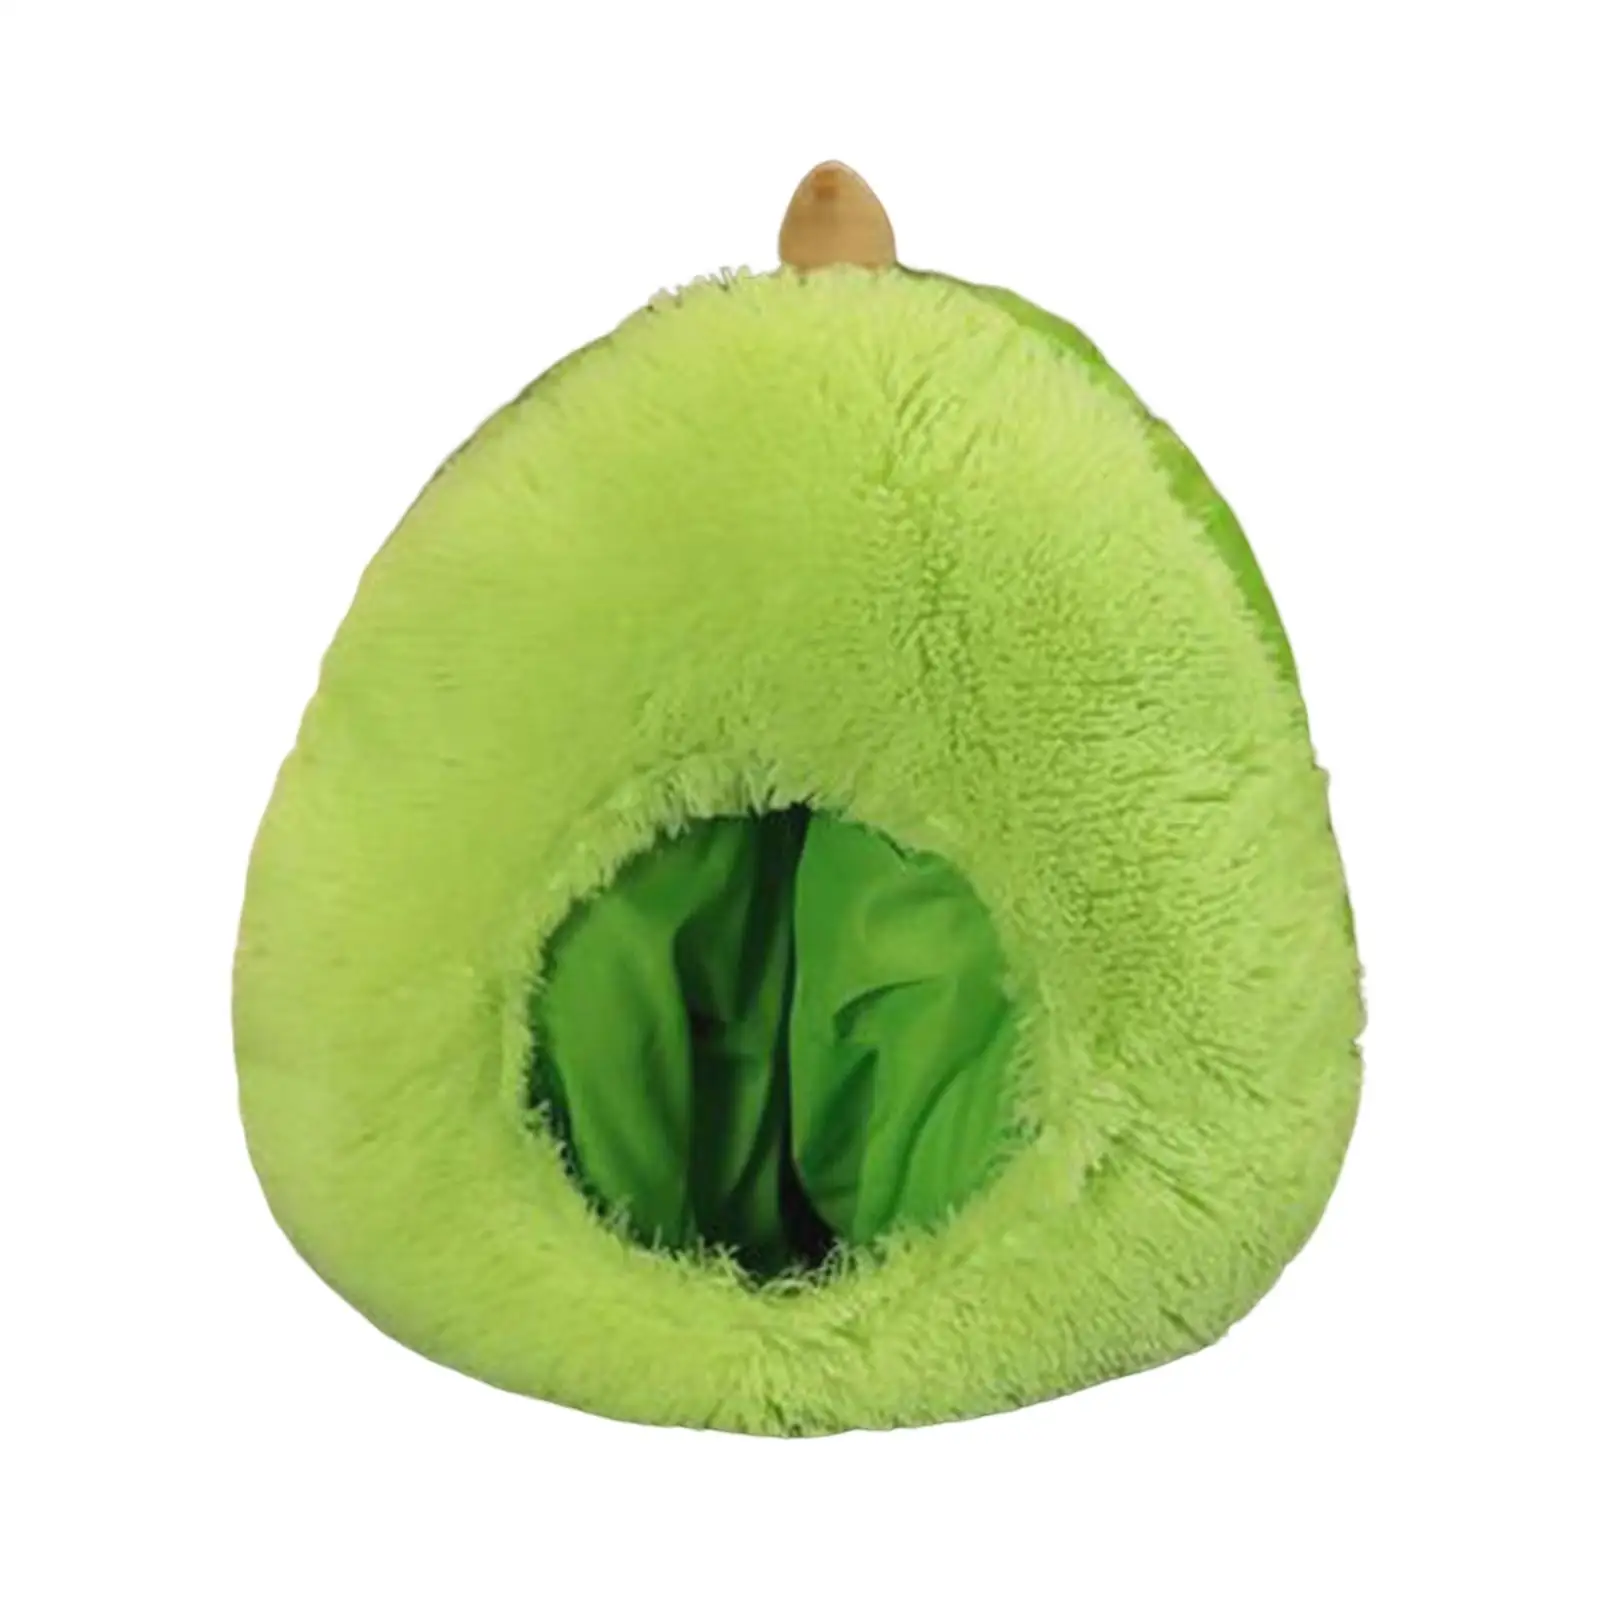 Plush Fruit Headgear Hat Photo Props Cosplay Decorative Gifts for Women